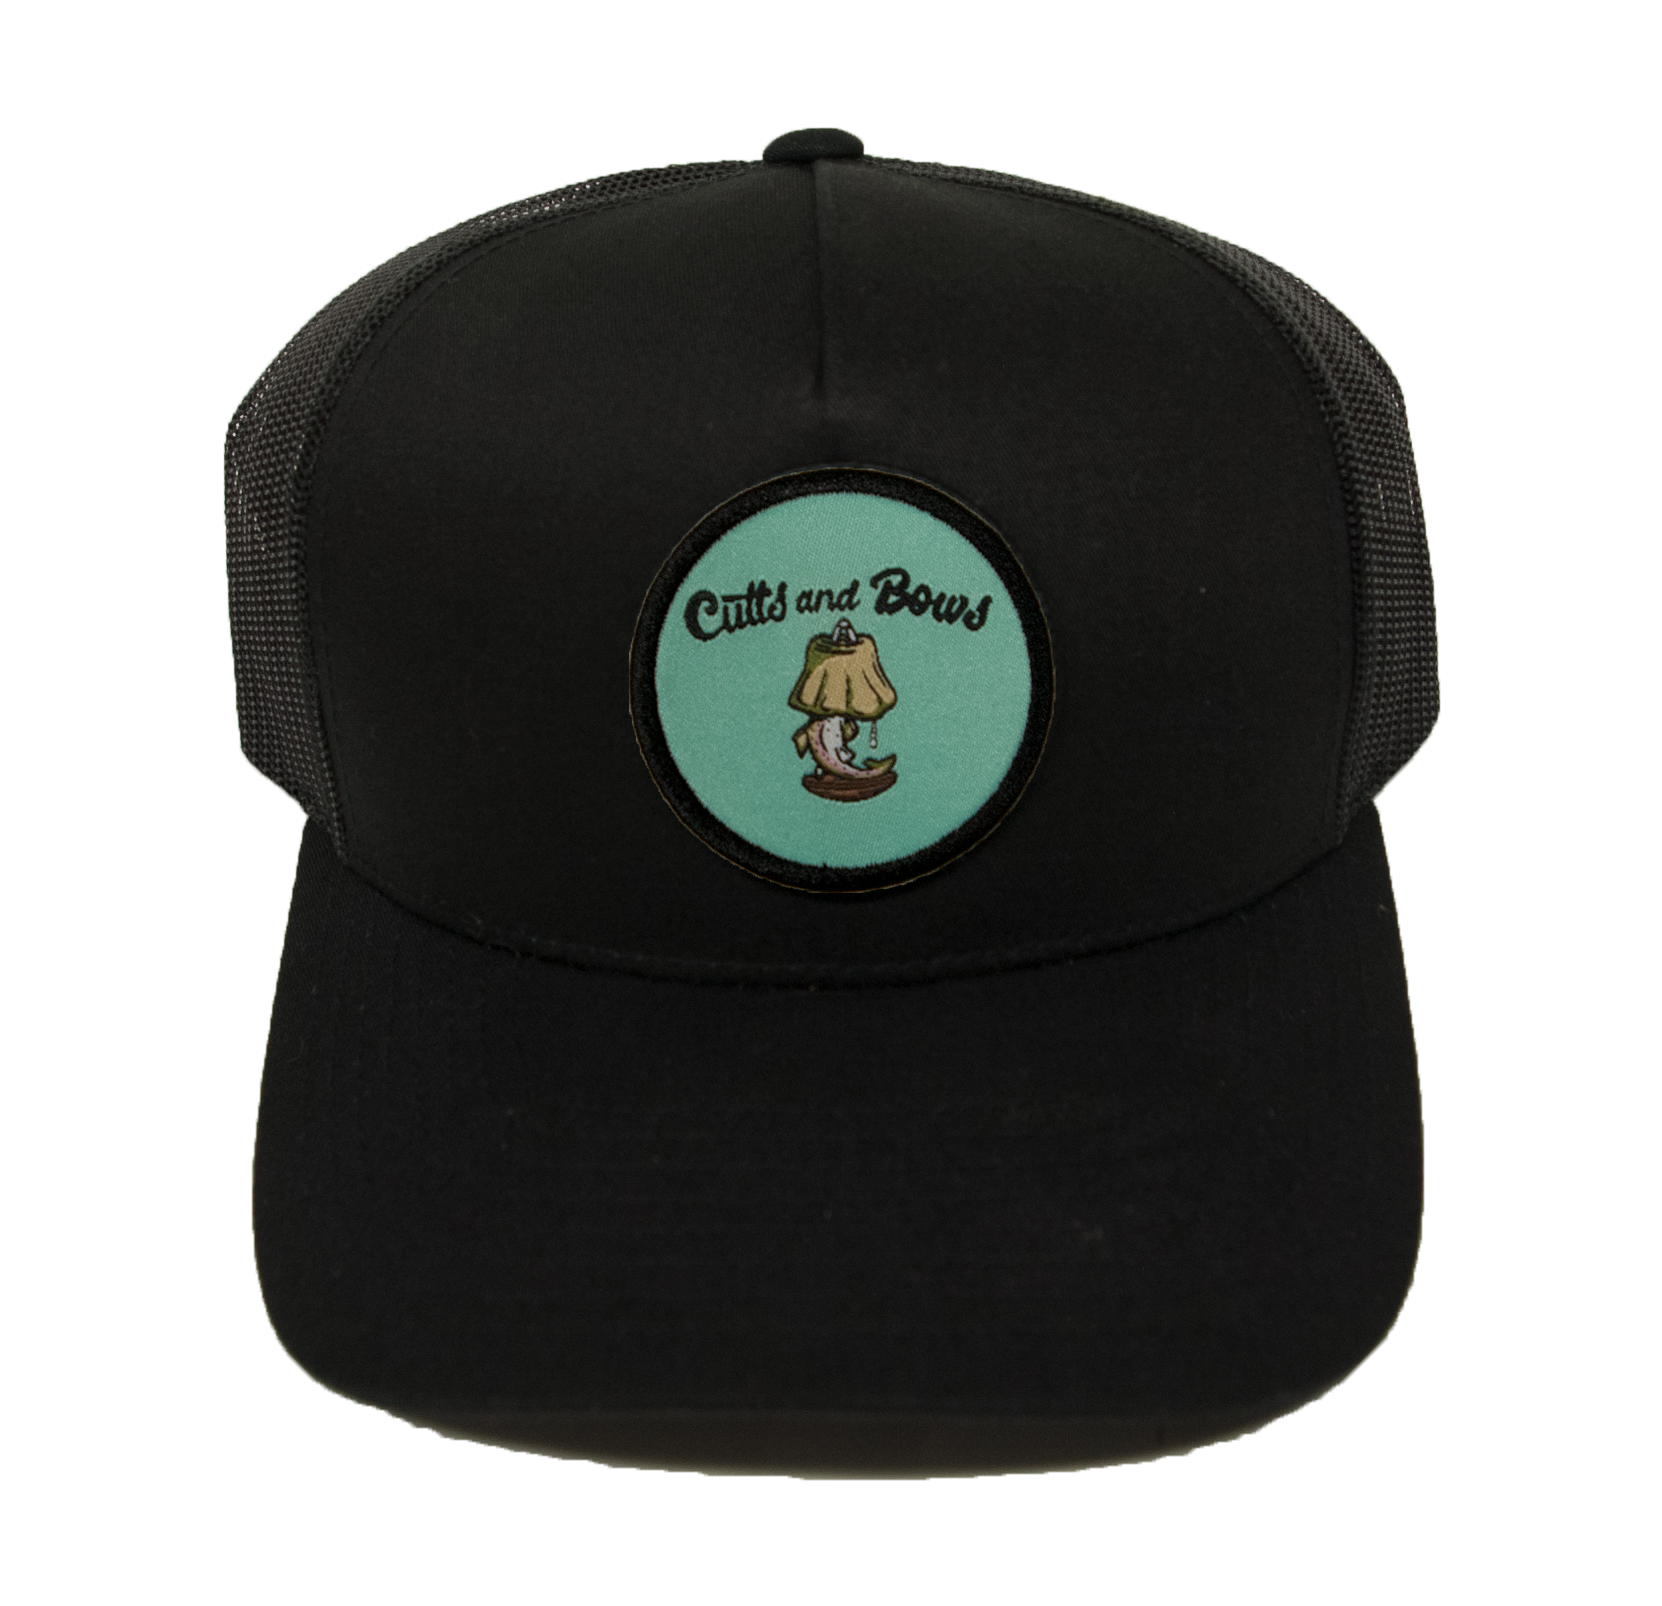 CUTTS AND BOWS HASLAM TROUT TRUCKER HAT - The Drive Skateshop